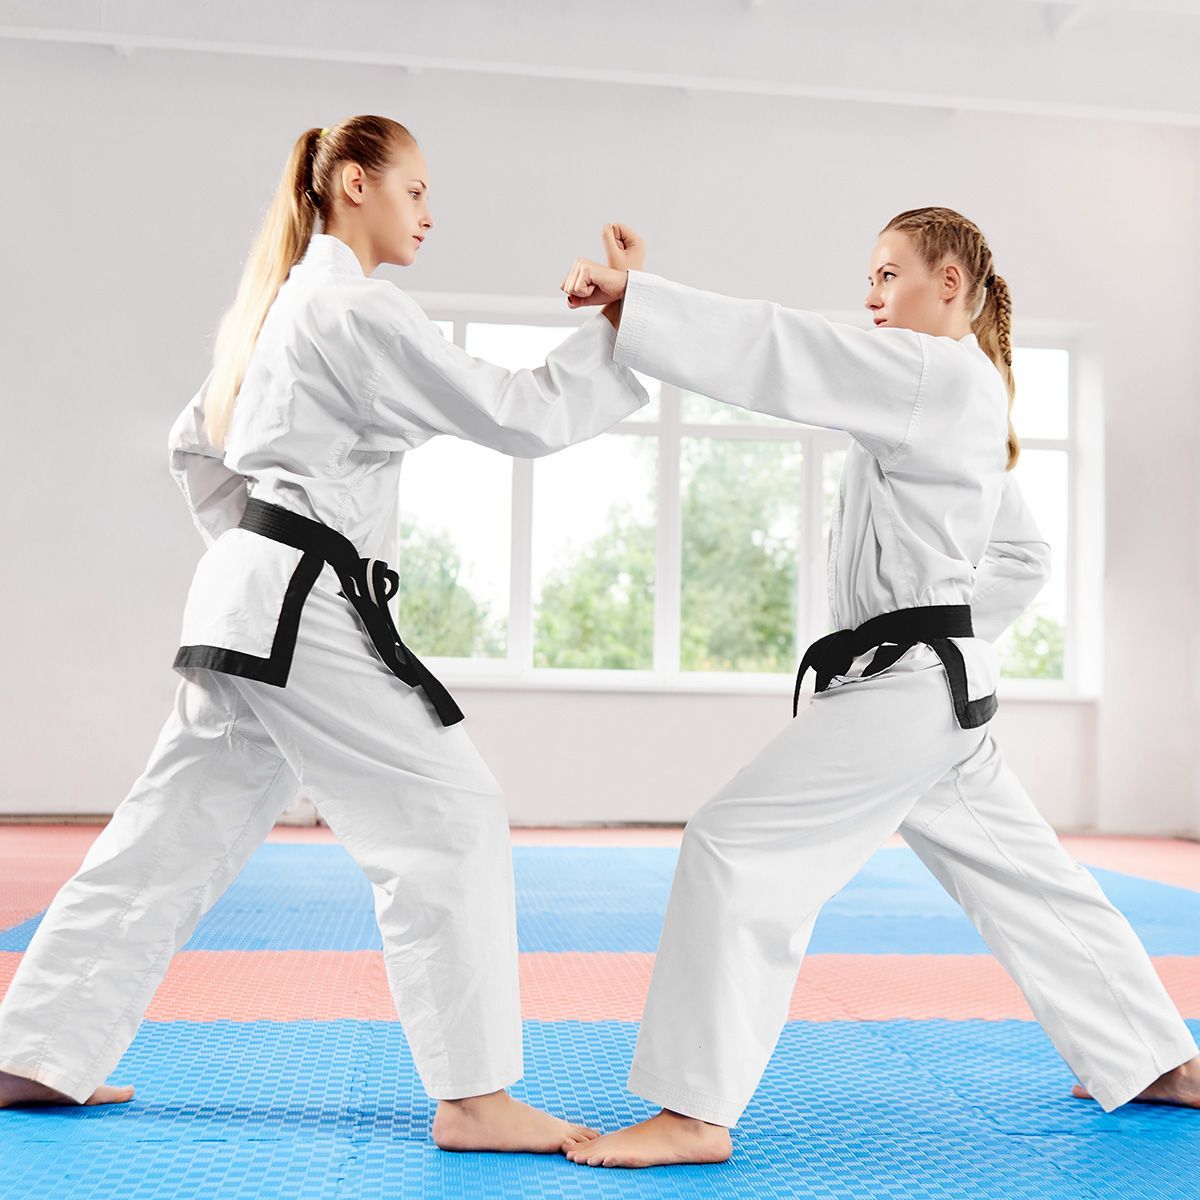 two women are practicing karate on a mat in a gym .